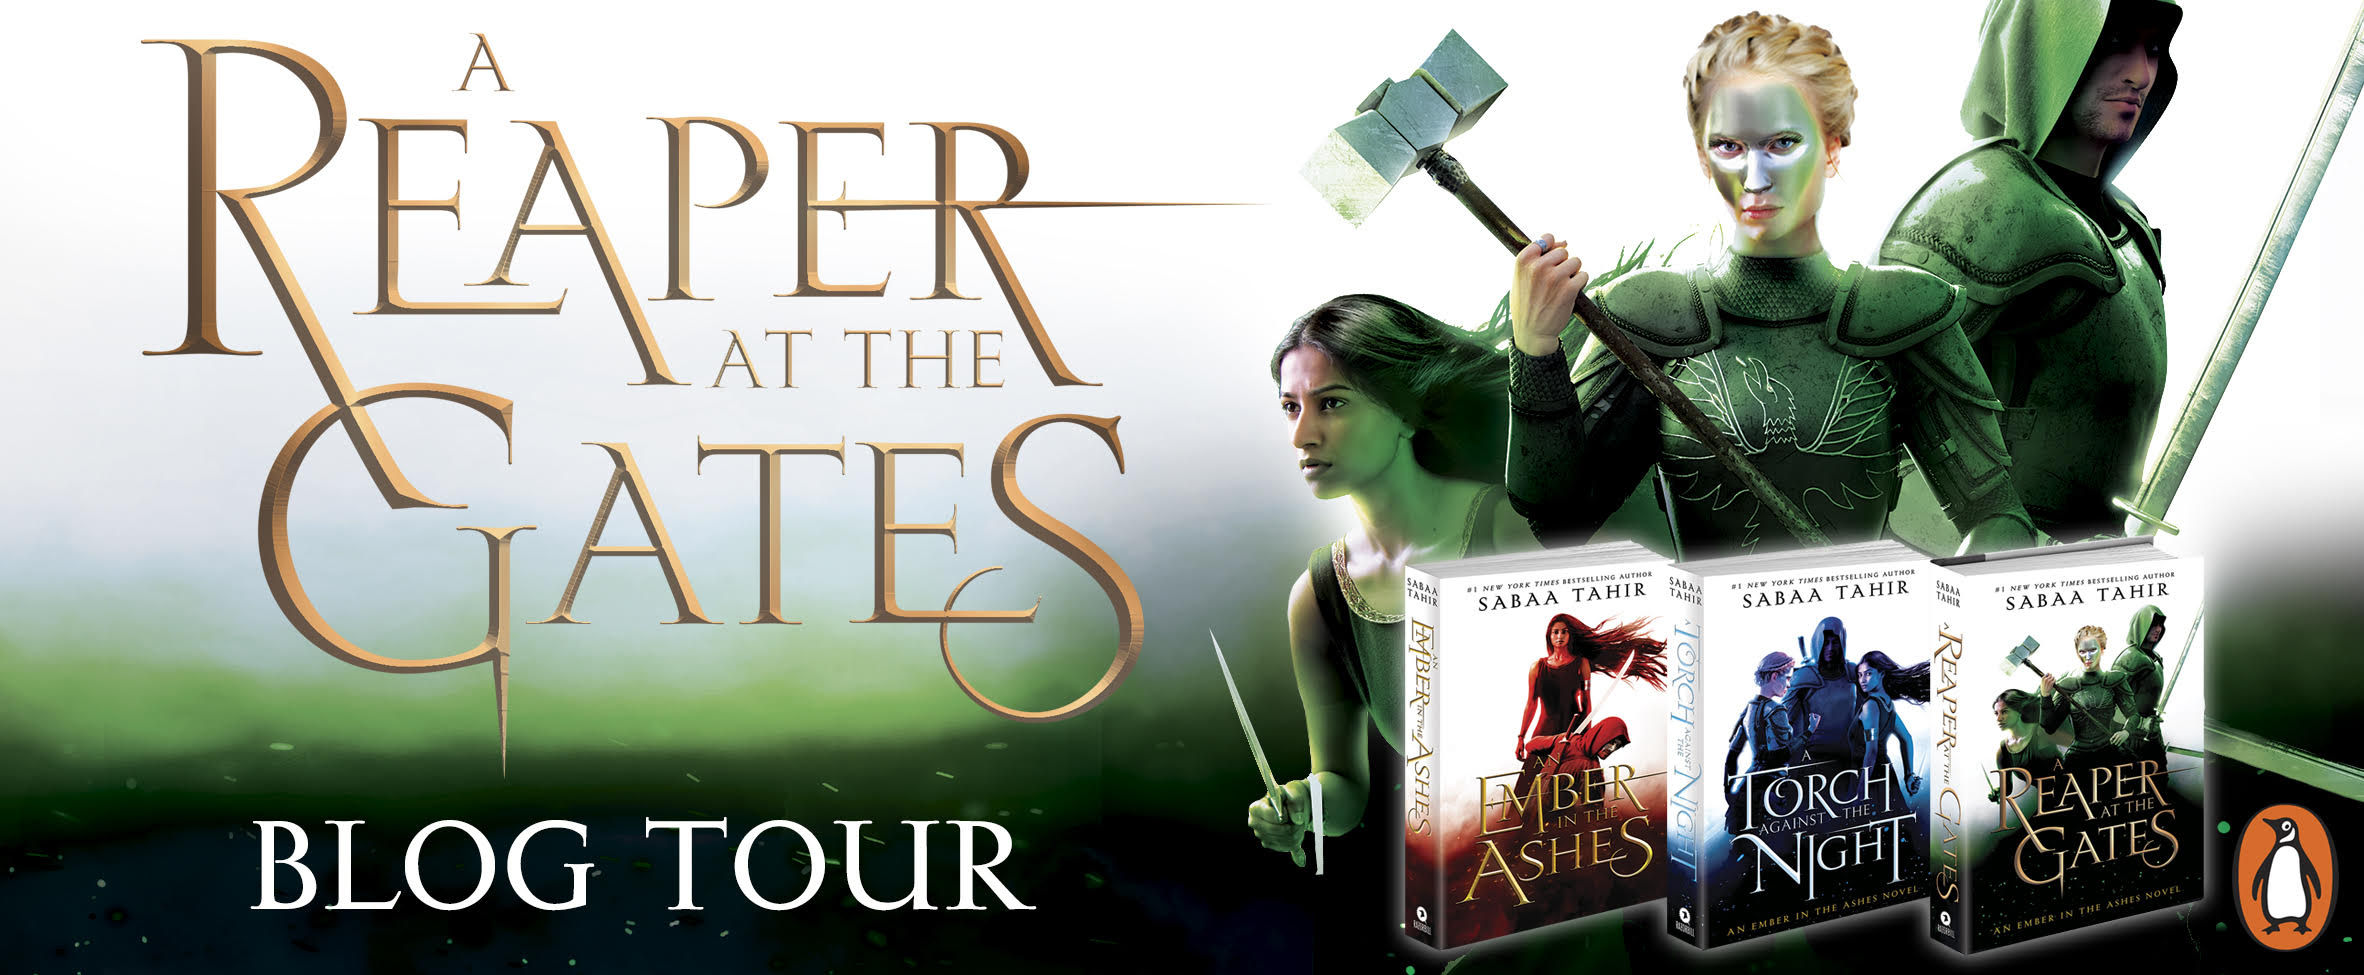 Re-Read Blog Tour: A Reaper at the Gates (An Ember in the Ashes #3) by Sabaa Tahir